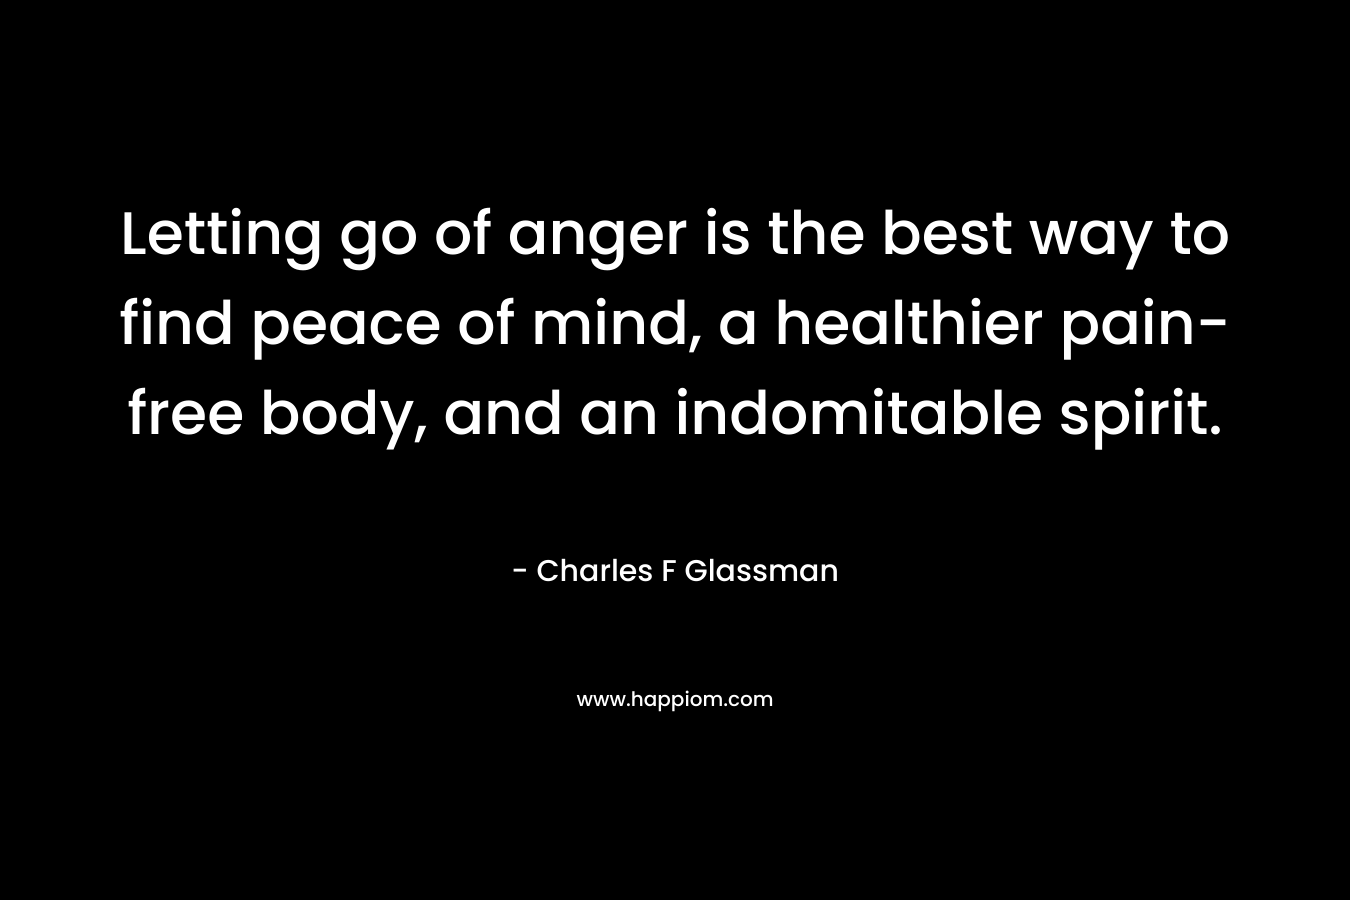 Letting go of anger is the best way to find peace of mind, a healthier pain-free body, and an indomitable spirit. – Charles F Glassman